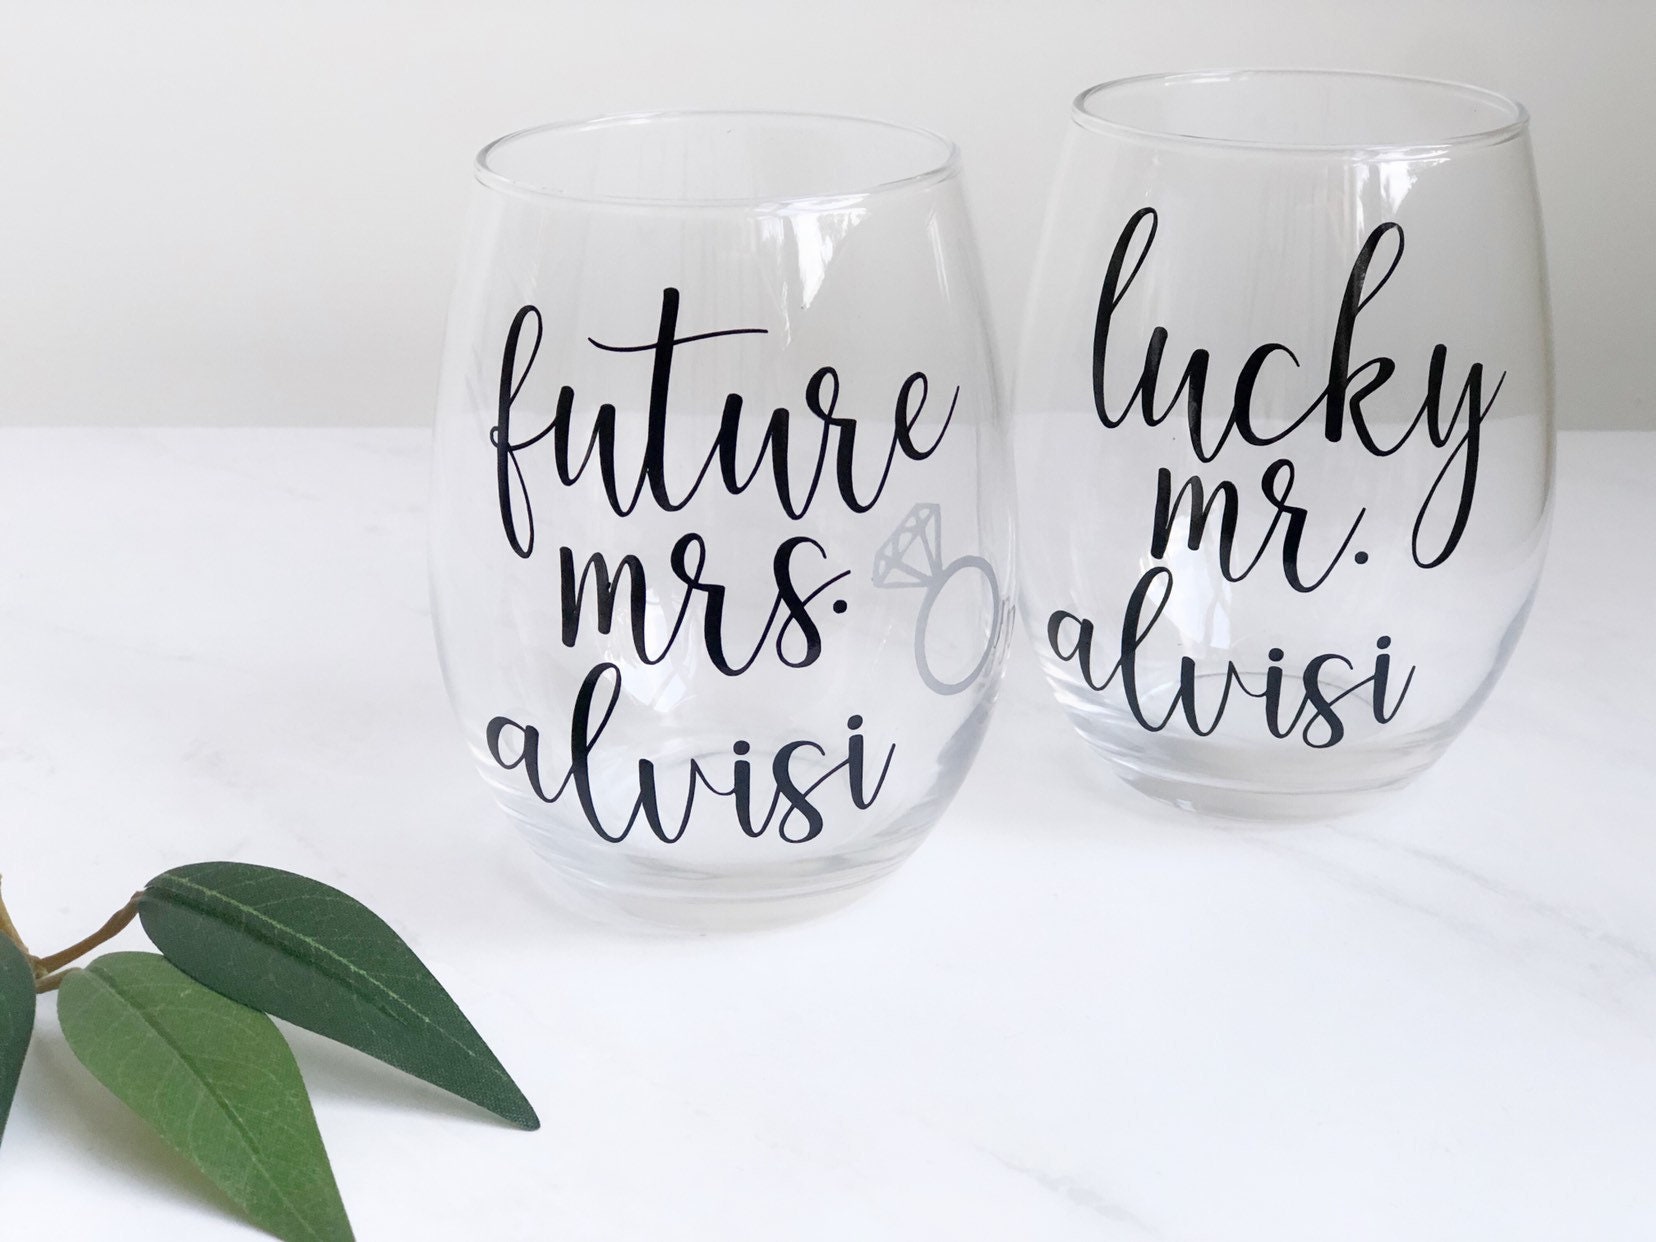 Pair of Personalized Mr. & Mrs. Wine Glasses